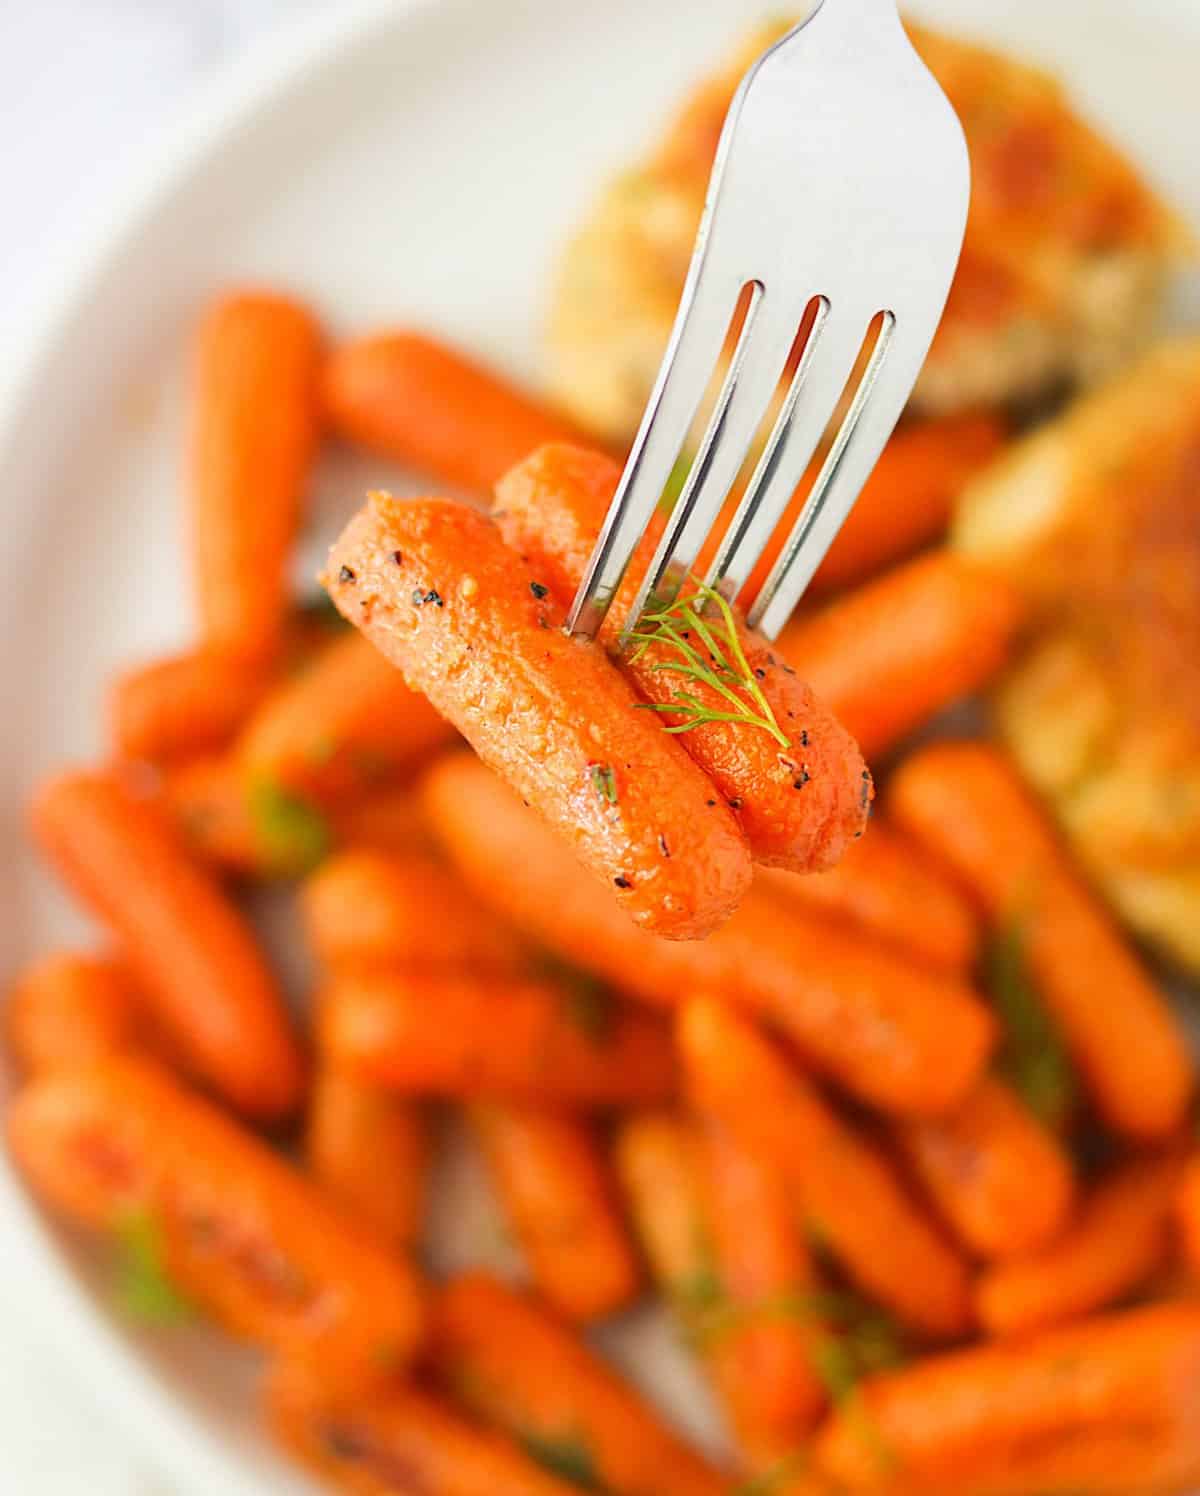 Taking a bite of Roasted Baby Carrots for a delectable side dish